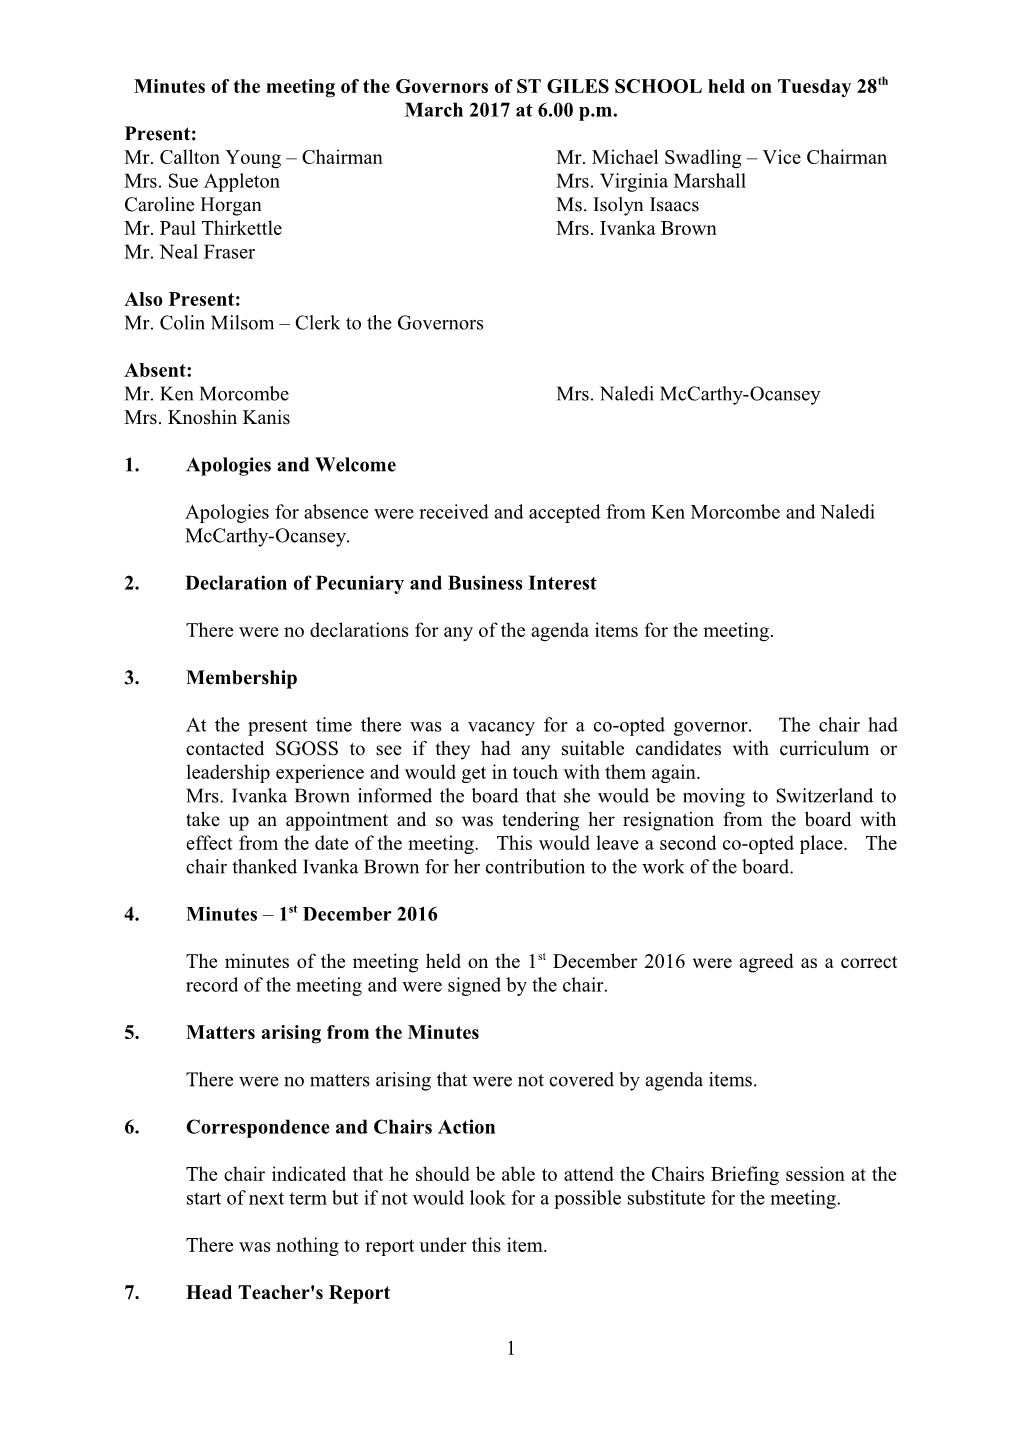 Minutes of the Meeting of the Governors of ST GILES SCHOOL Held on Tuesday 28Th March